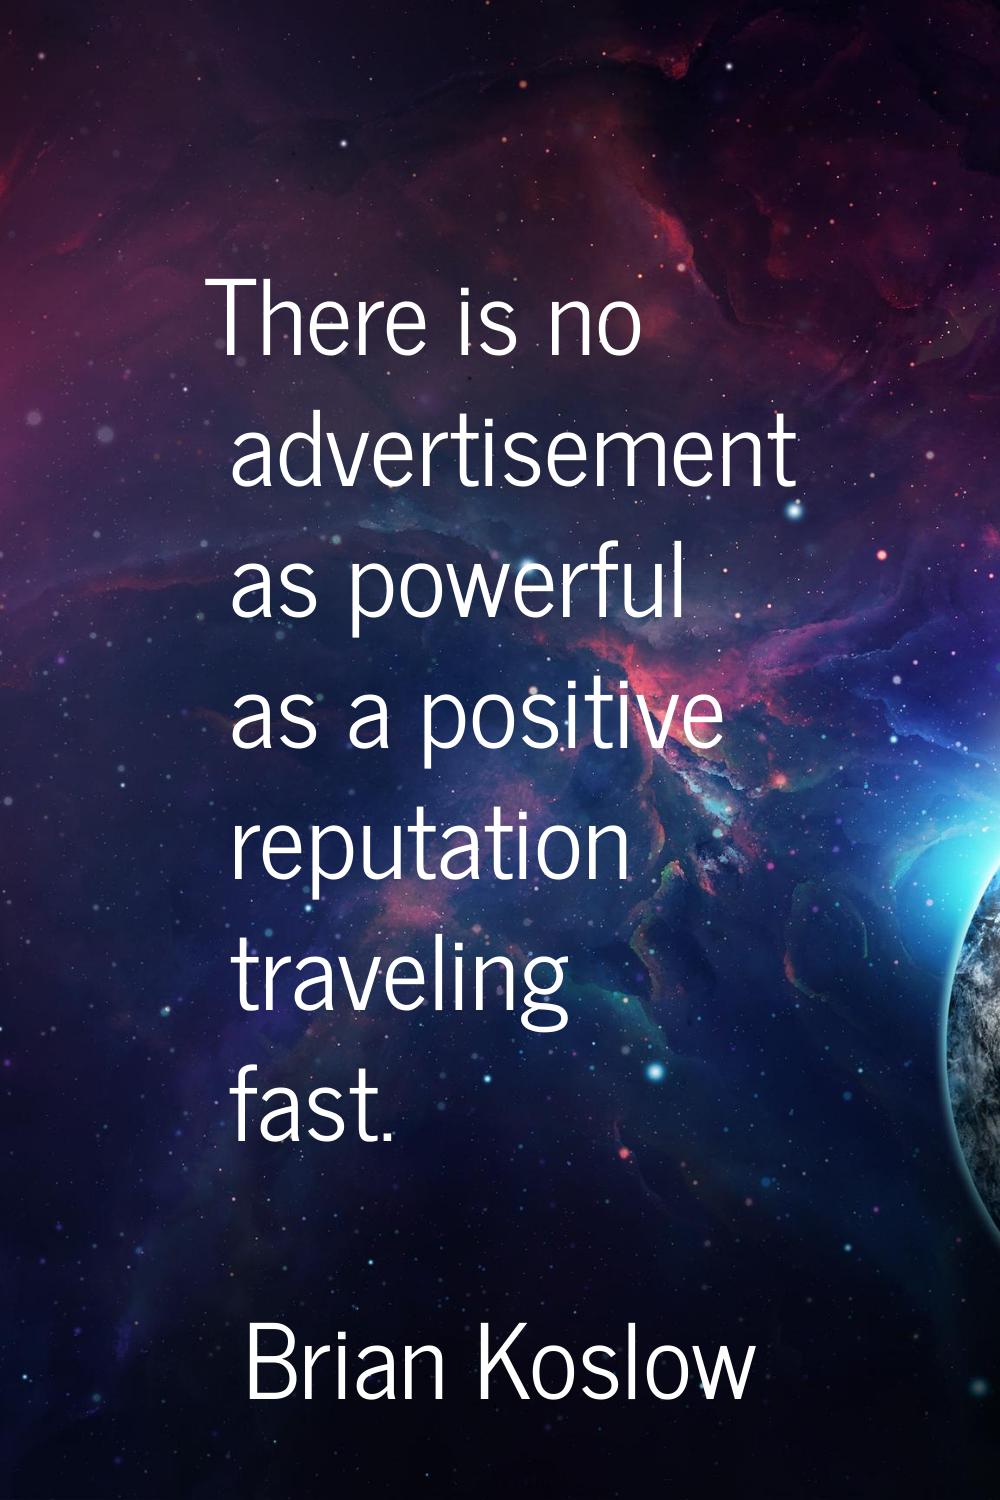 There is no advertisement as powerful as a positive reputation traveling fast.